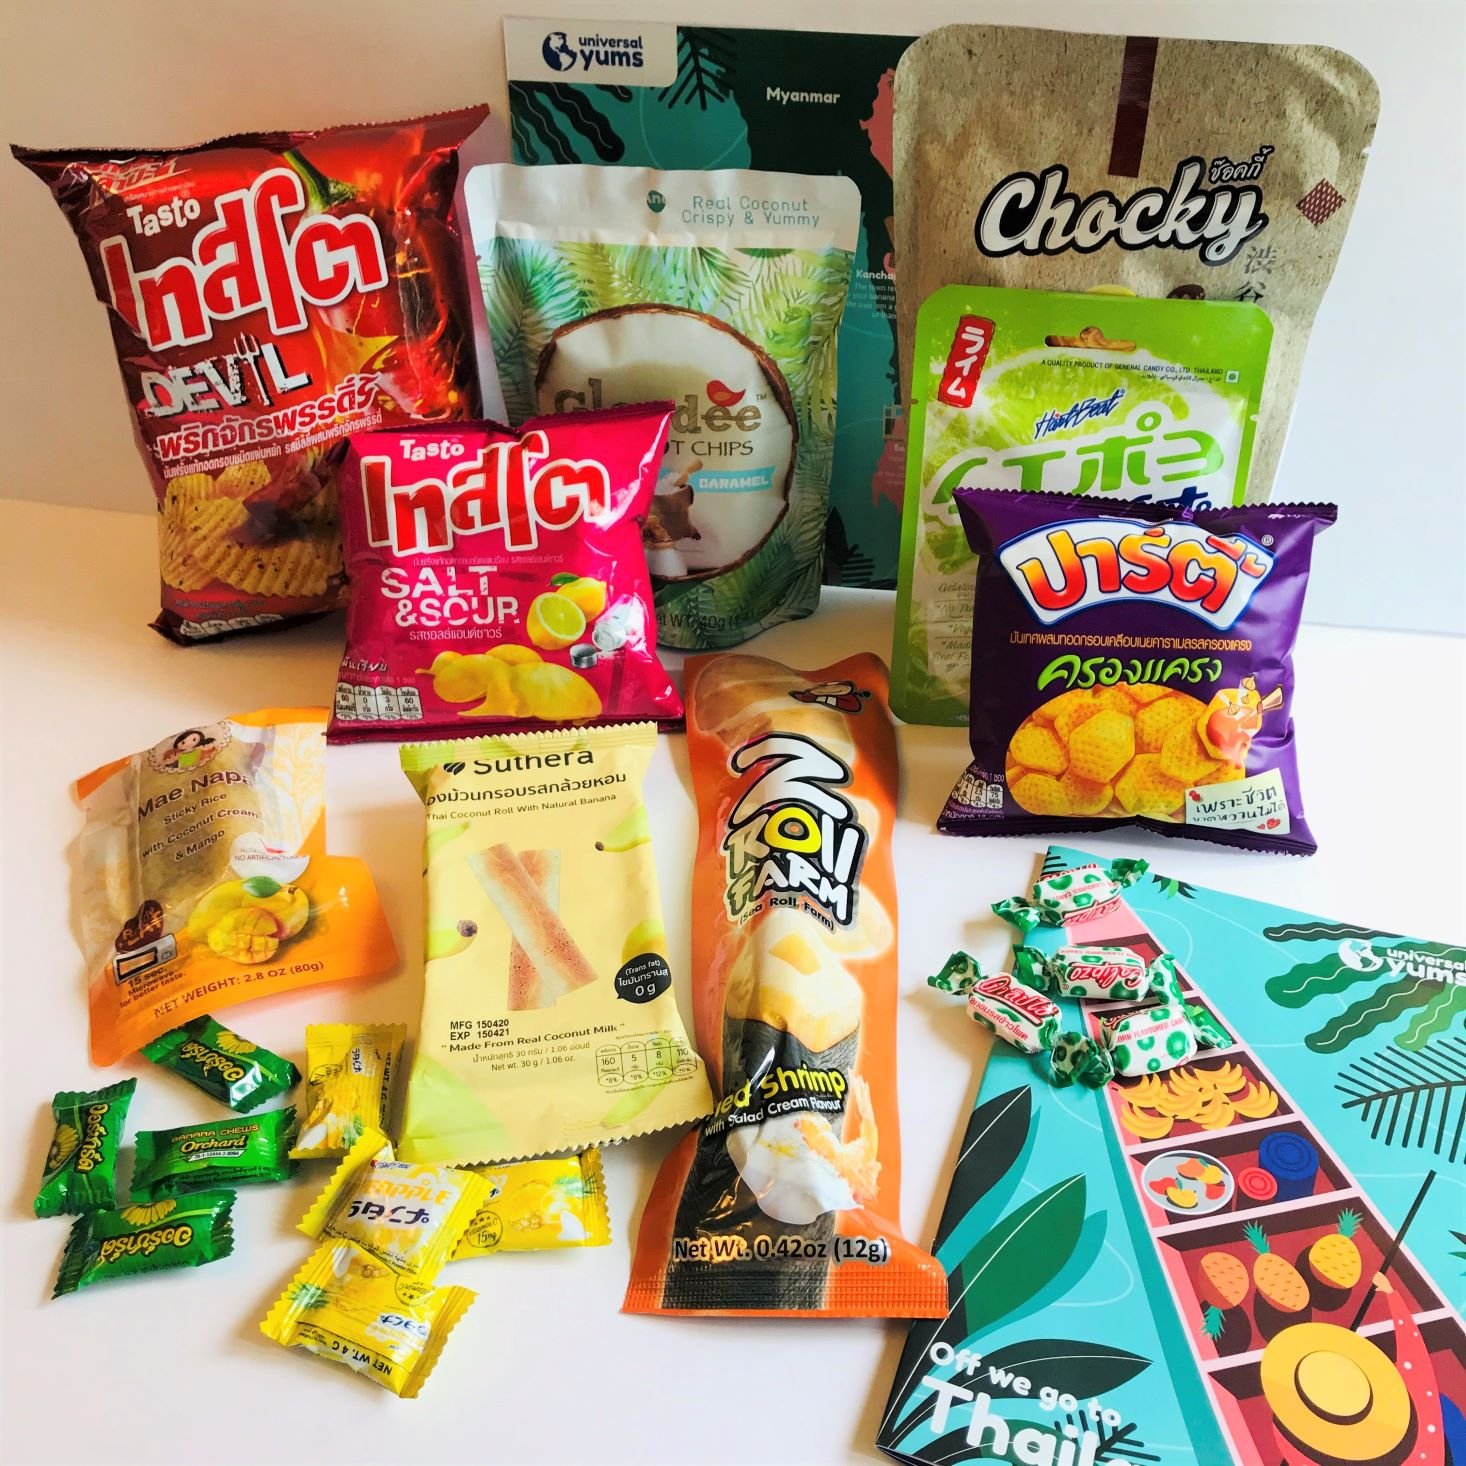 Snacks from Thailand in the Universal Yums box.